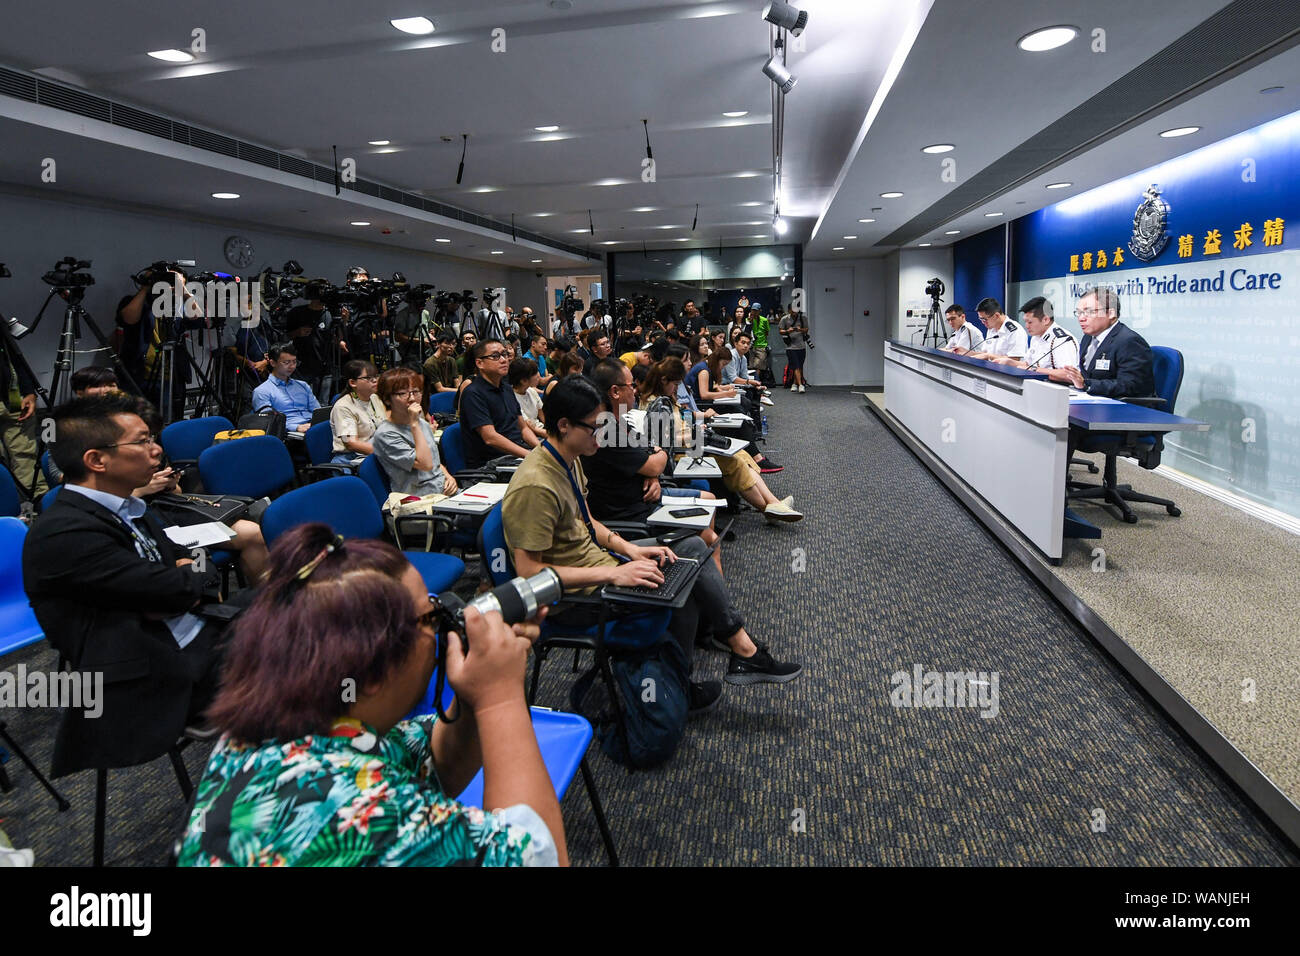 (190821) -- HONG KONG, Aug. 21, 2019 (Xinhua) -- Photo taken on Aug. 21, 2019 shows the scene of a press conference held by Hong Kong police in south China's Hong Kong. Hong Kong police on Wednesday called on all journalists to respect each other's freedom of news coverage after a female reporter from the mainland was surrounded by her Hong Kong peers questioning her identity after a press conference on Tuesday. The police have existing measures to effectively verify reporters' identity, consistent with that of other press conferences of the Hong Kong Special Administrative Region (HKSAR) g Stock Photo